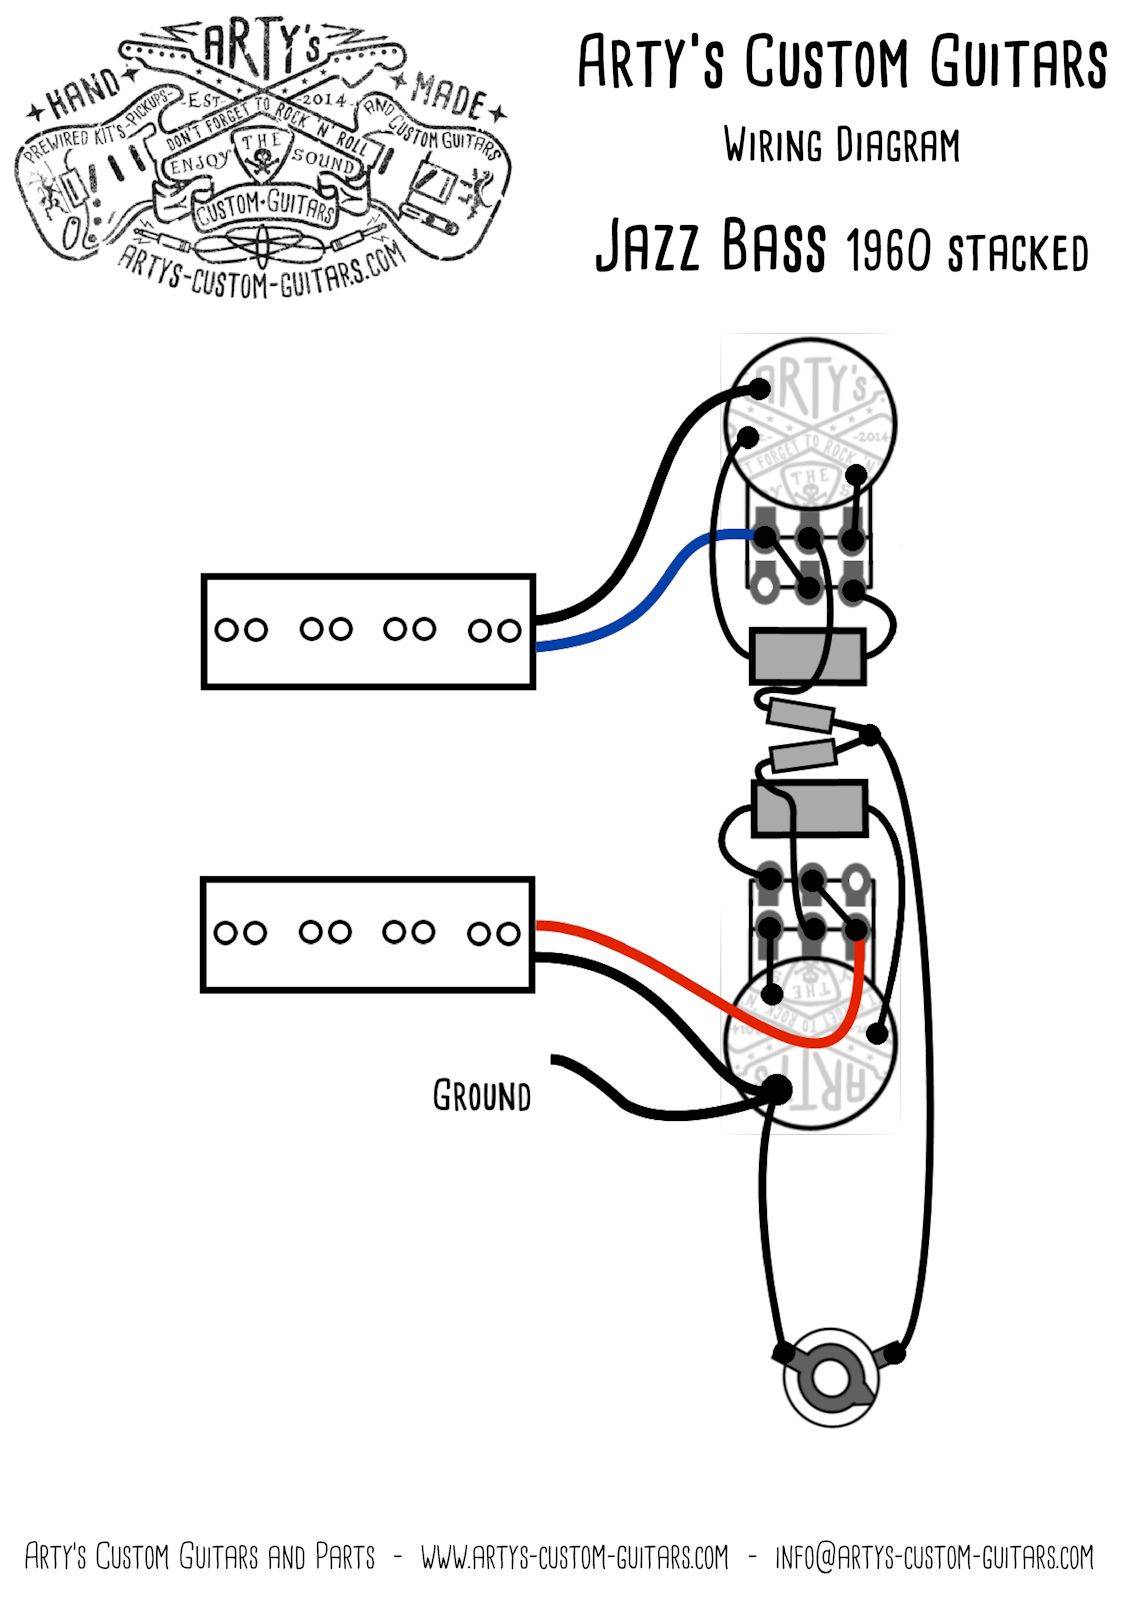 Arty's Custom Guitars Vintage Pre-Wired Prewired Kit Wiring Assembly - Bass Wiring Diagram